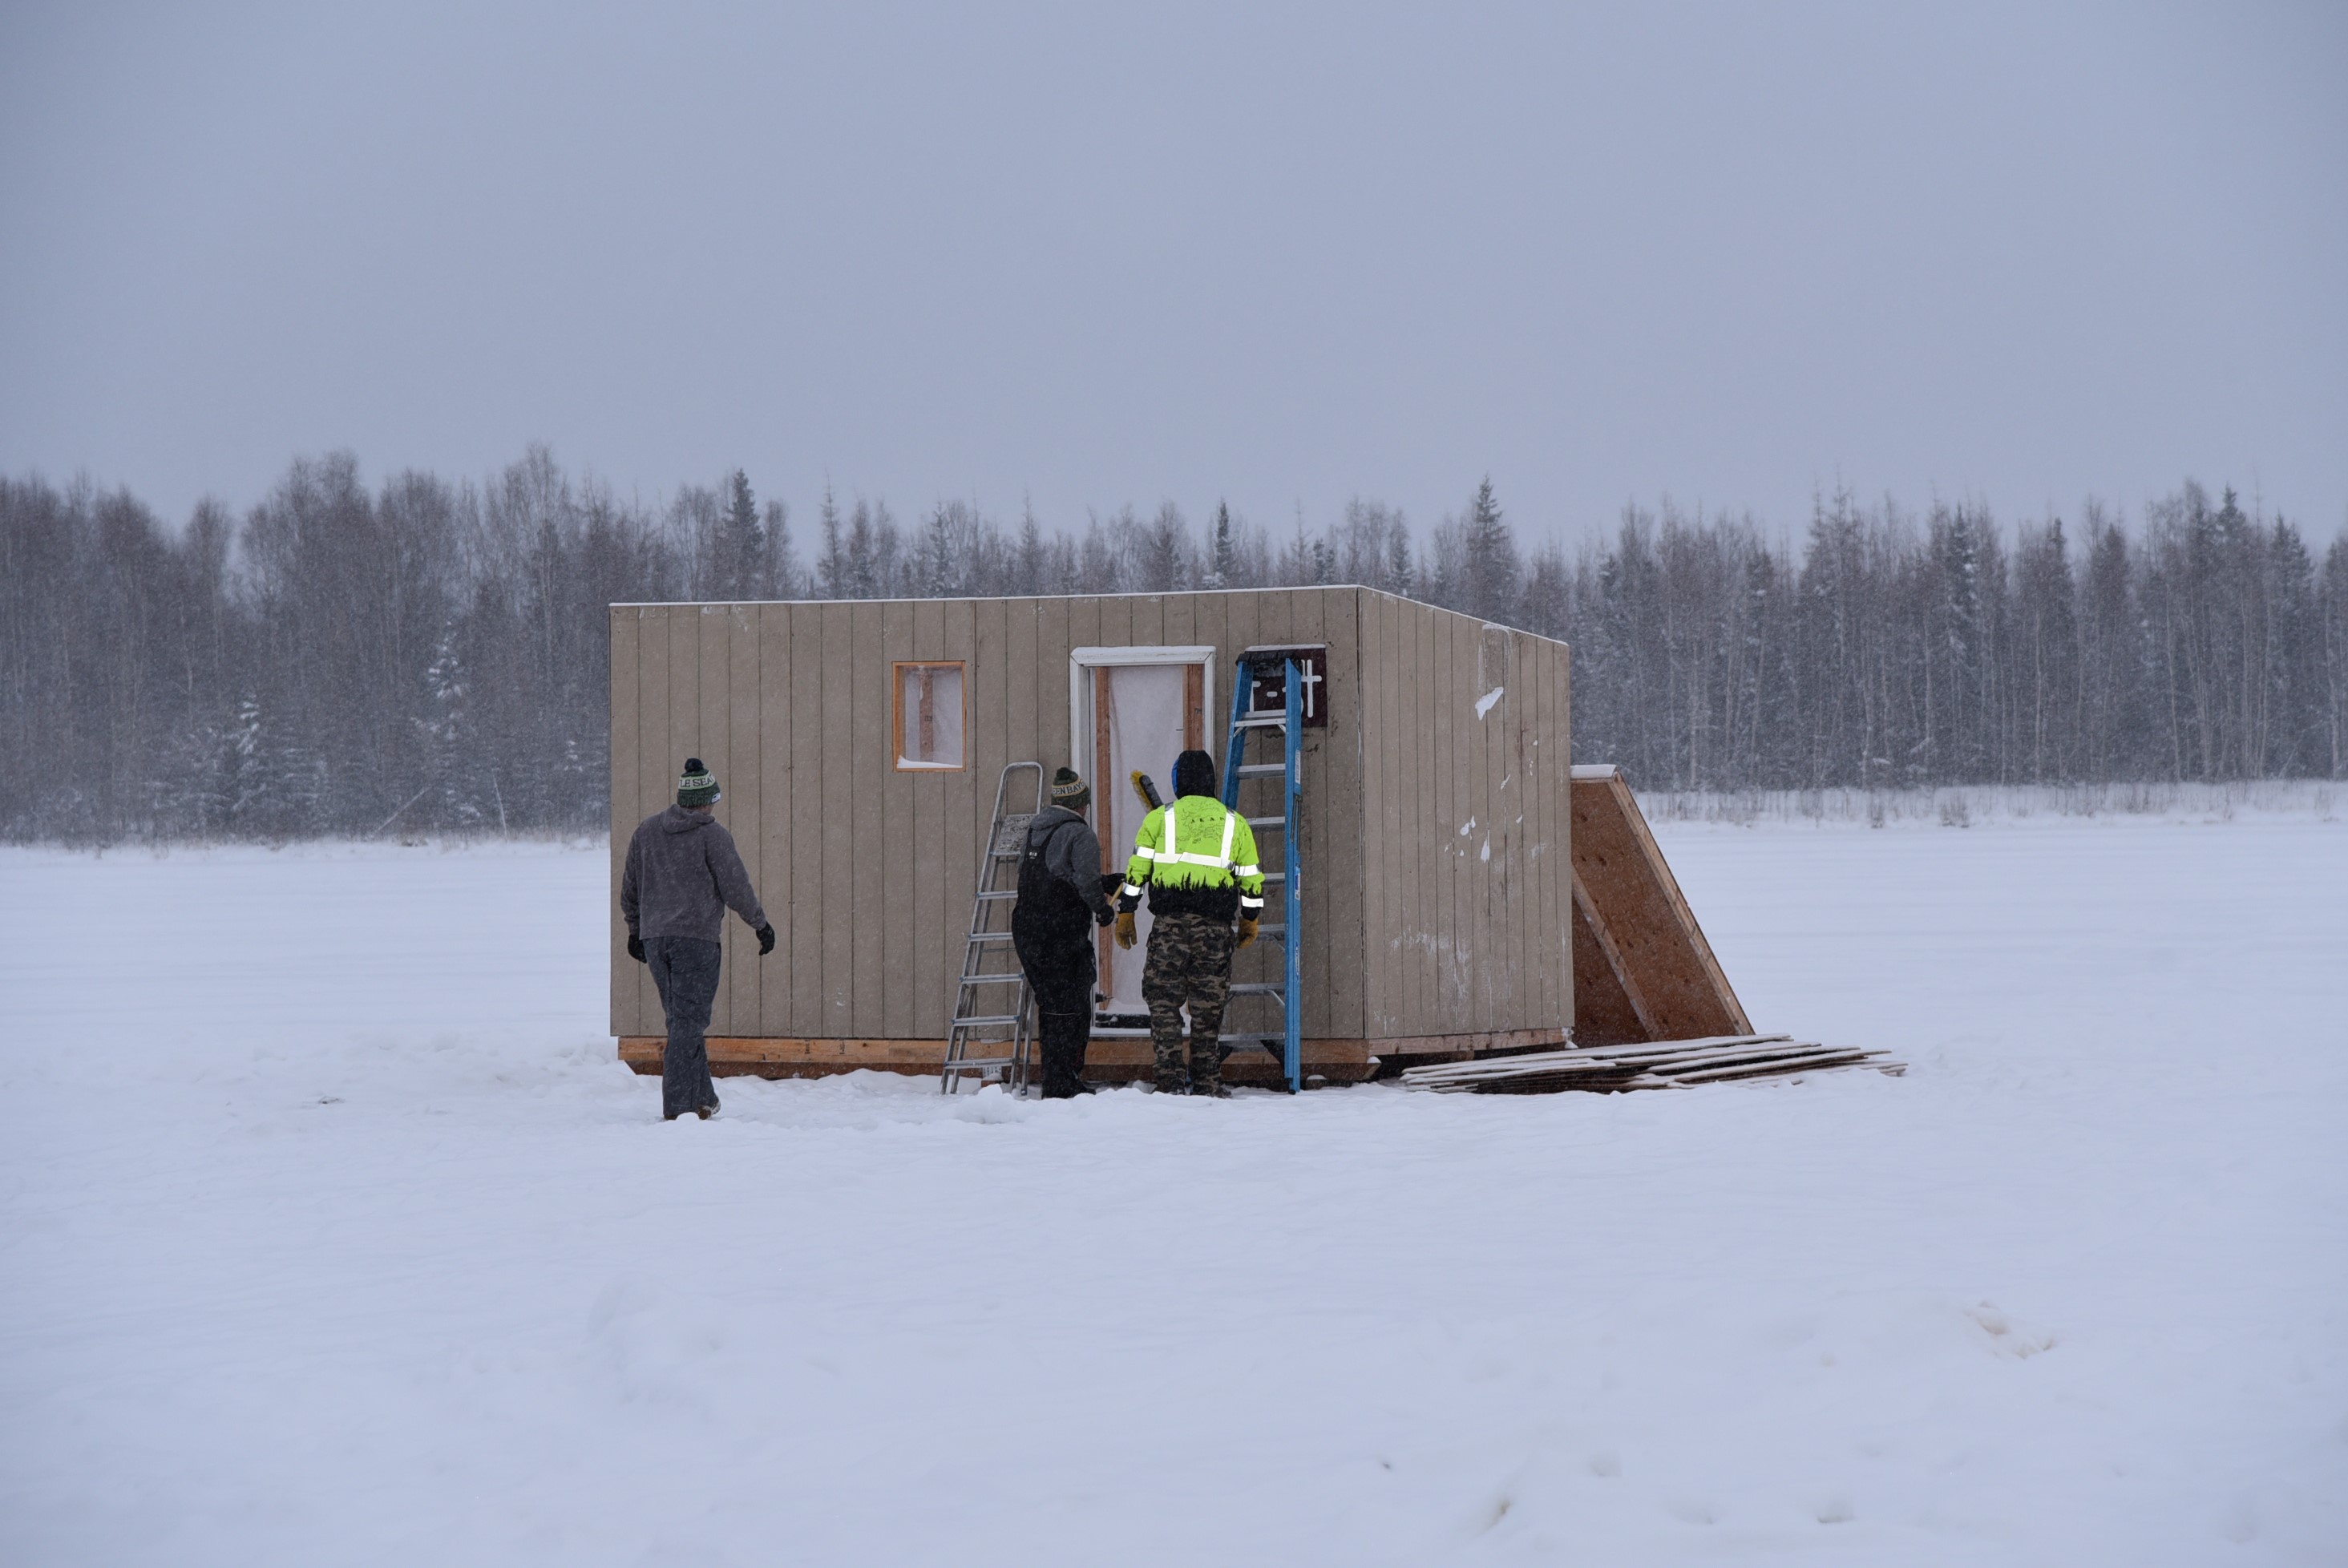 USACE awards construction contract for Chena 'mega project' in North Pole >  Alaska District > News Releases